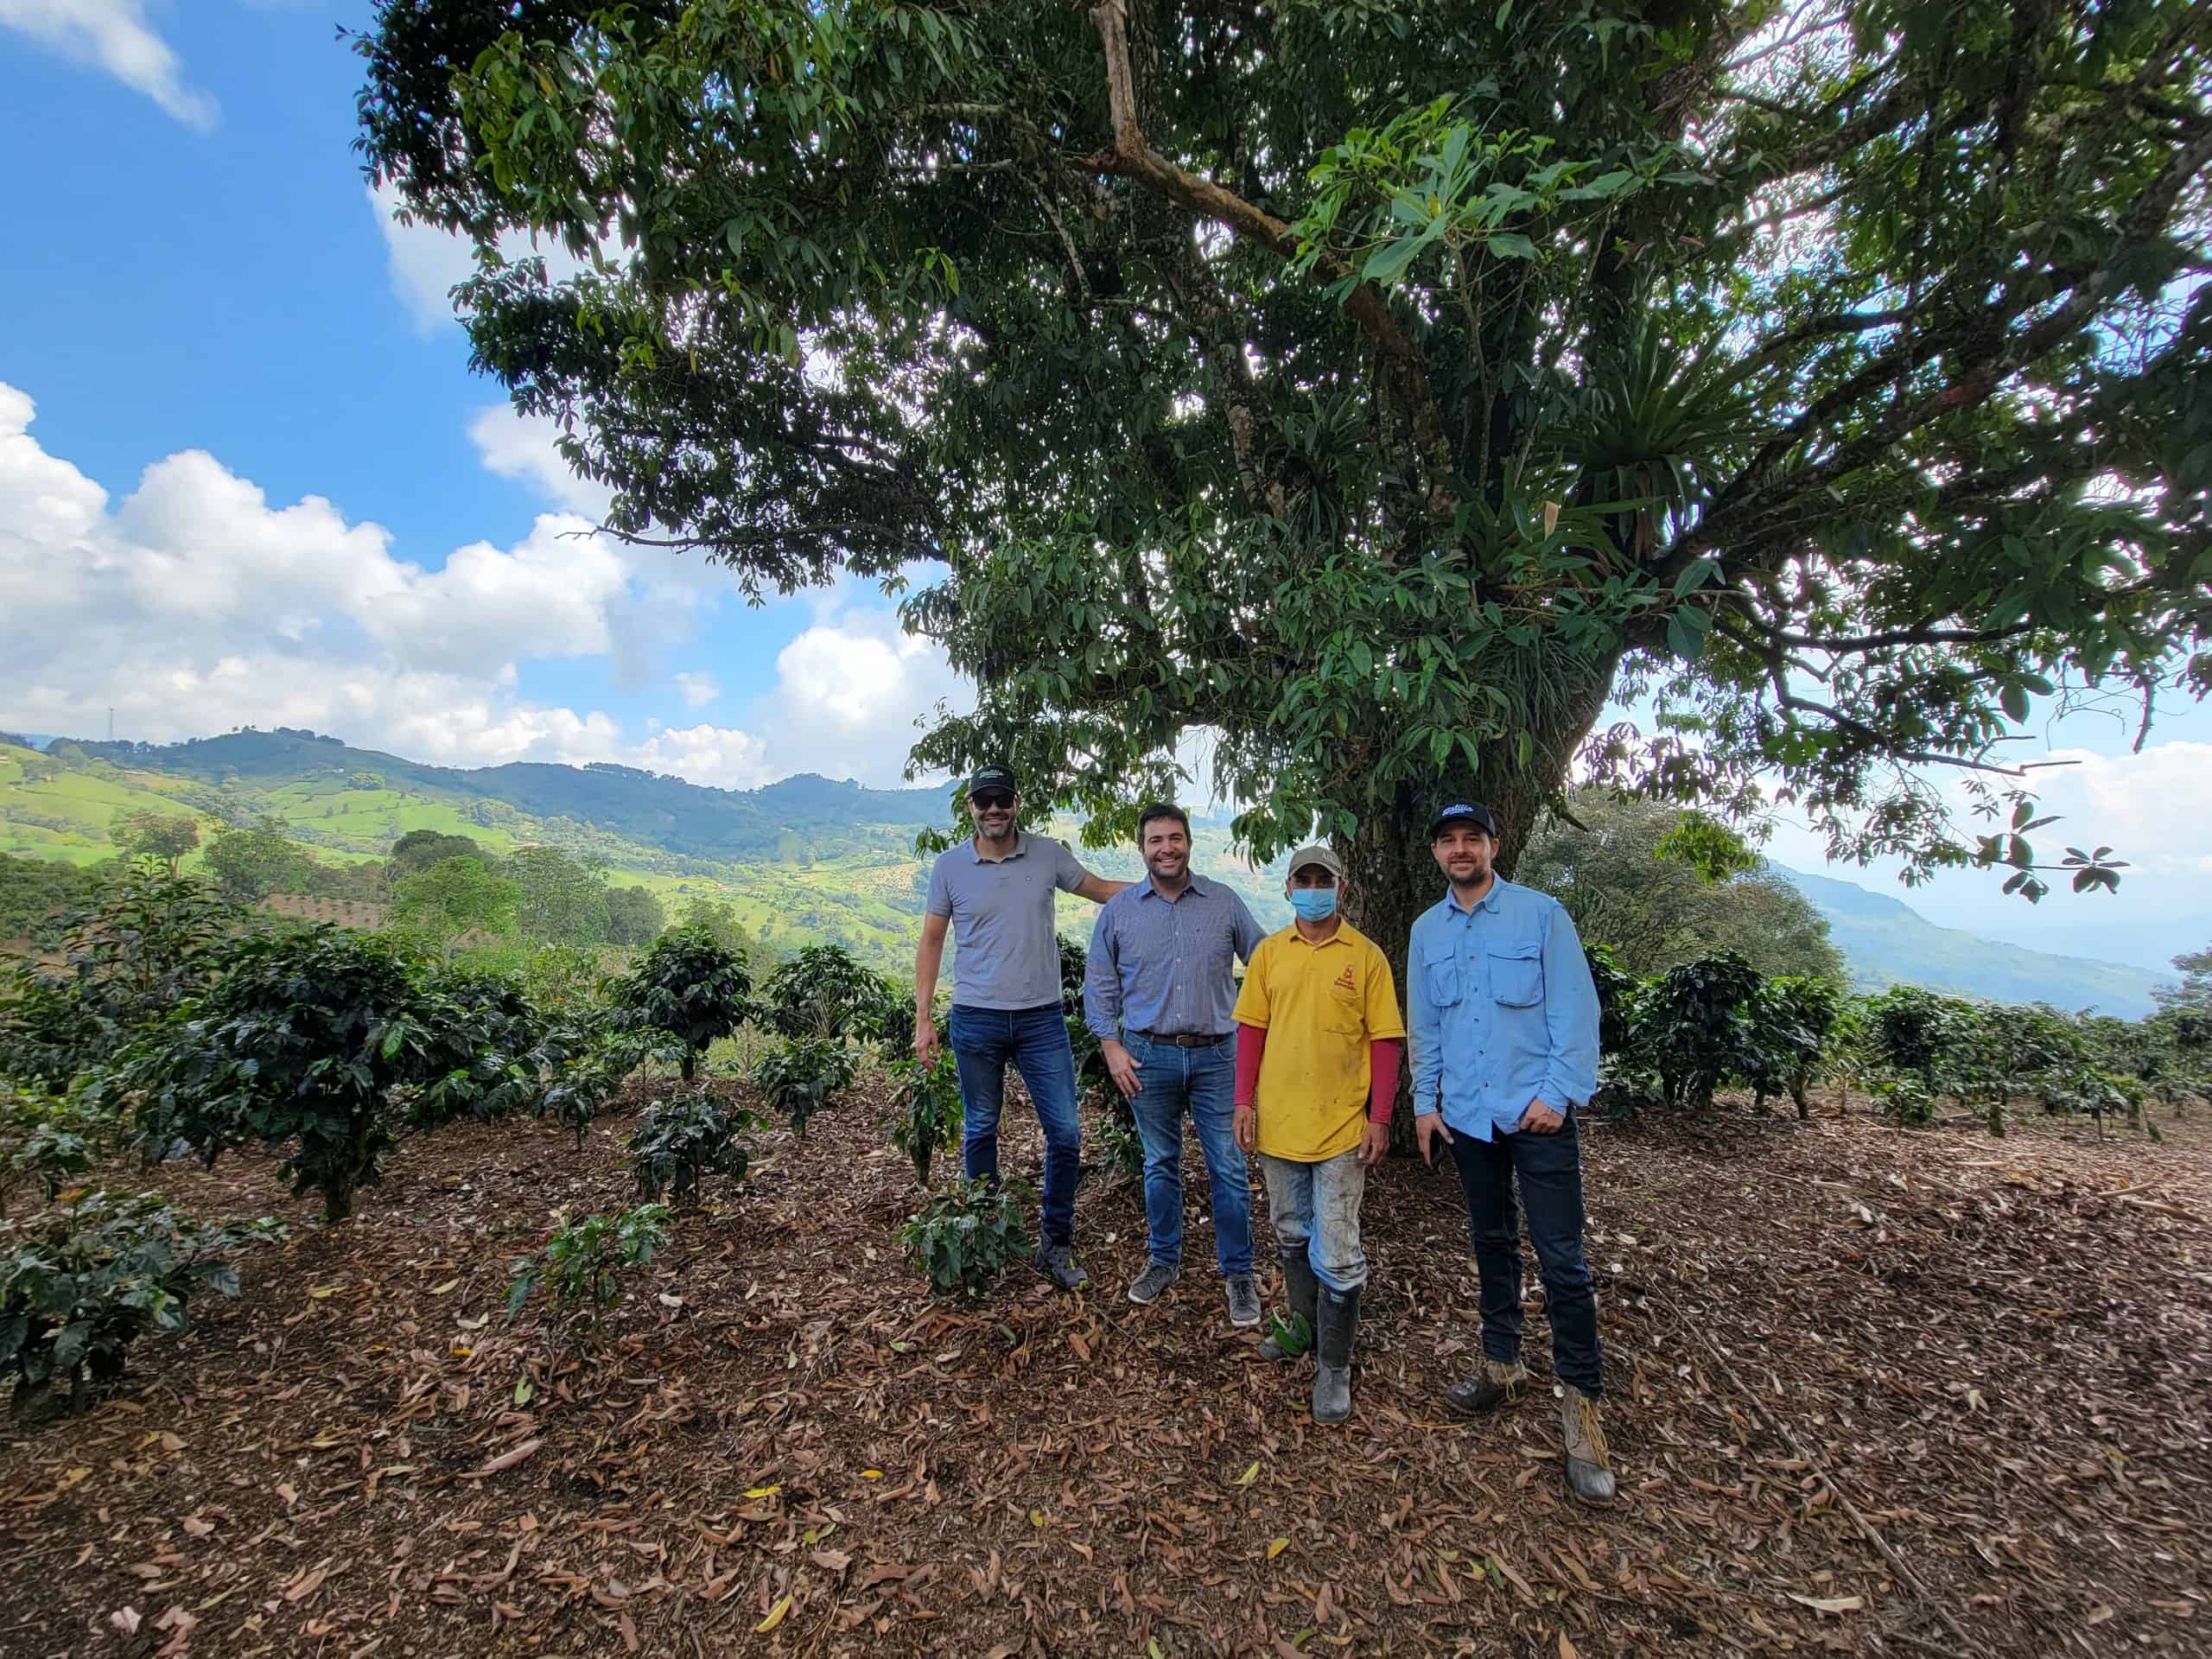 picture showing from left to right, Jaime Rodriguez CEO and co-founder of Hatillo Coffee, Felipe Mejia, Adolfo coffee farmer of "La Melisa" farm, and Miguel Echeverri Hatillo Coffee's co-founder and chief quality officer, near Fredonia, Antioquia - Colombia at "La Melisa" specialty coffee farm